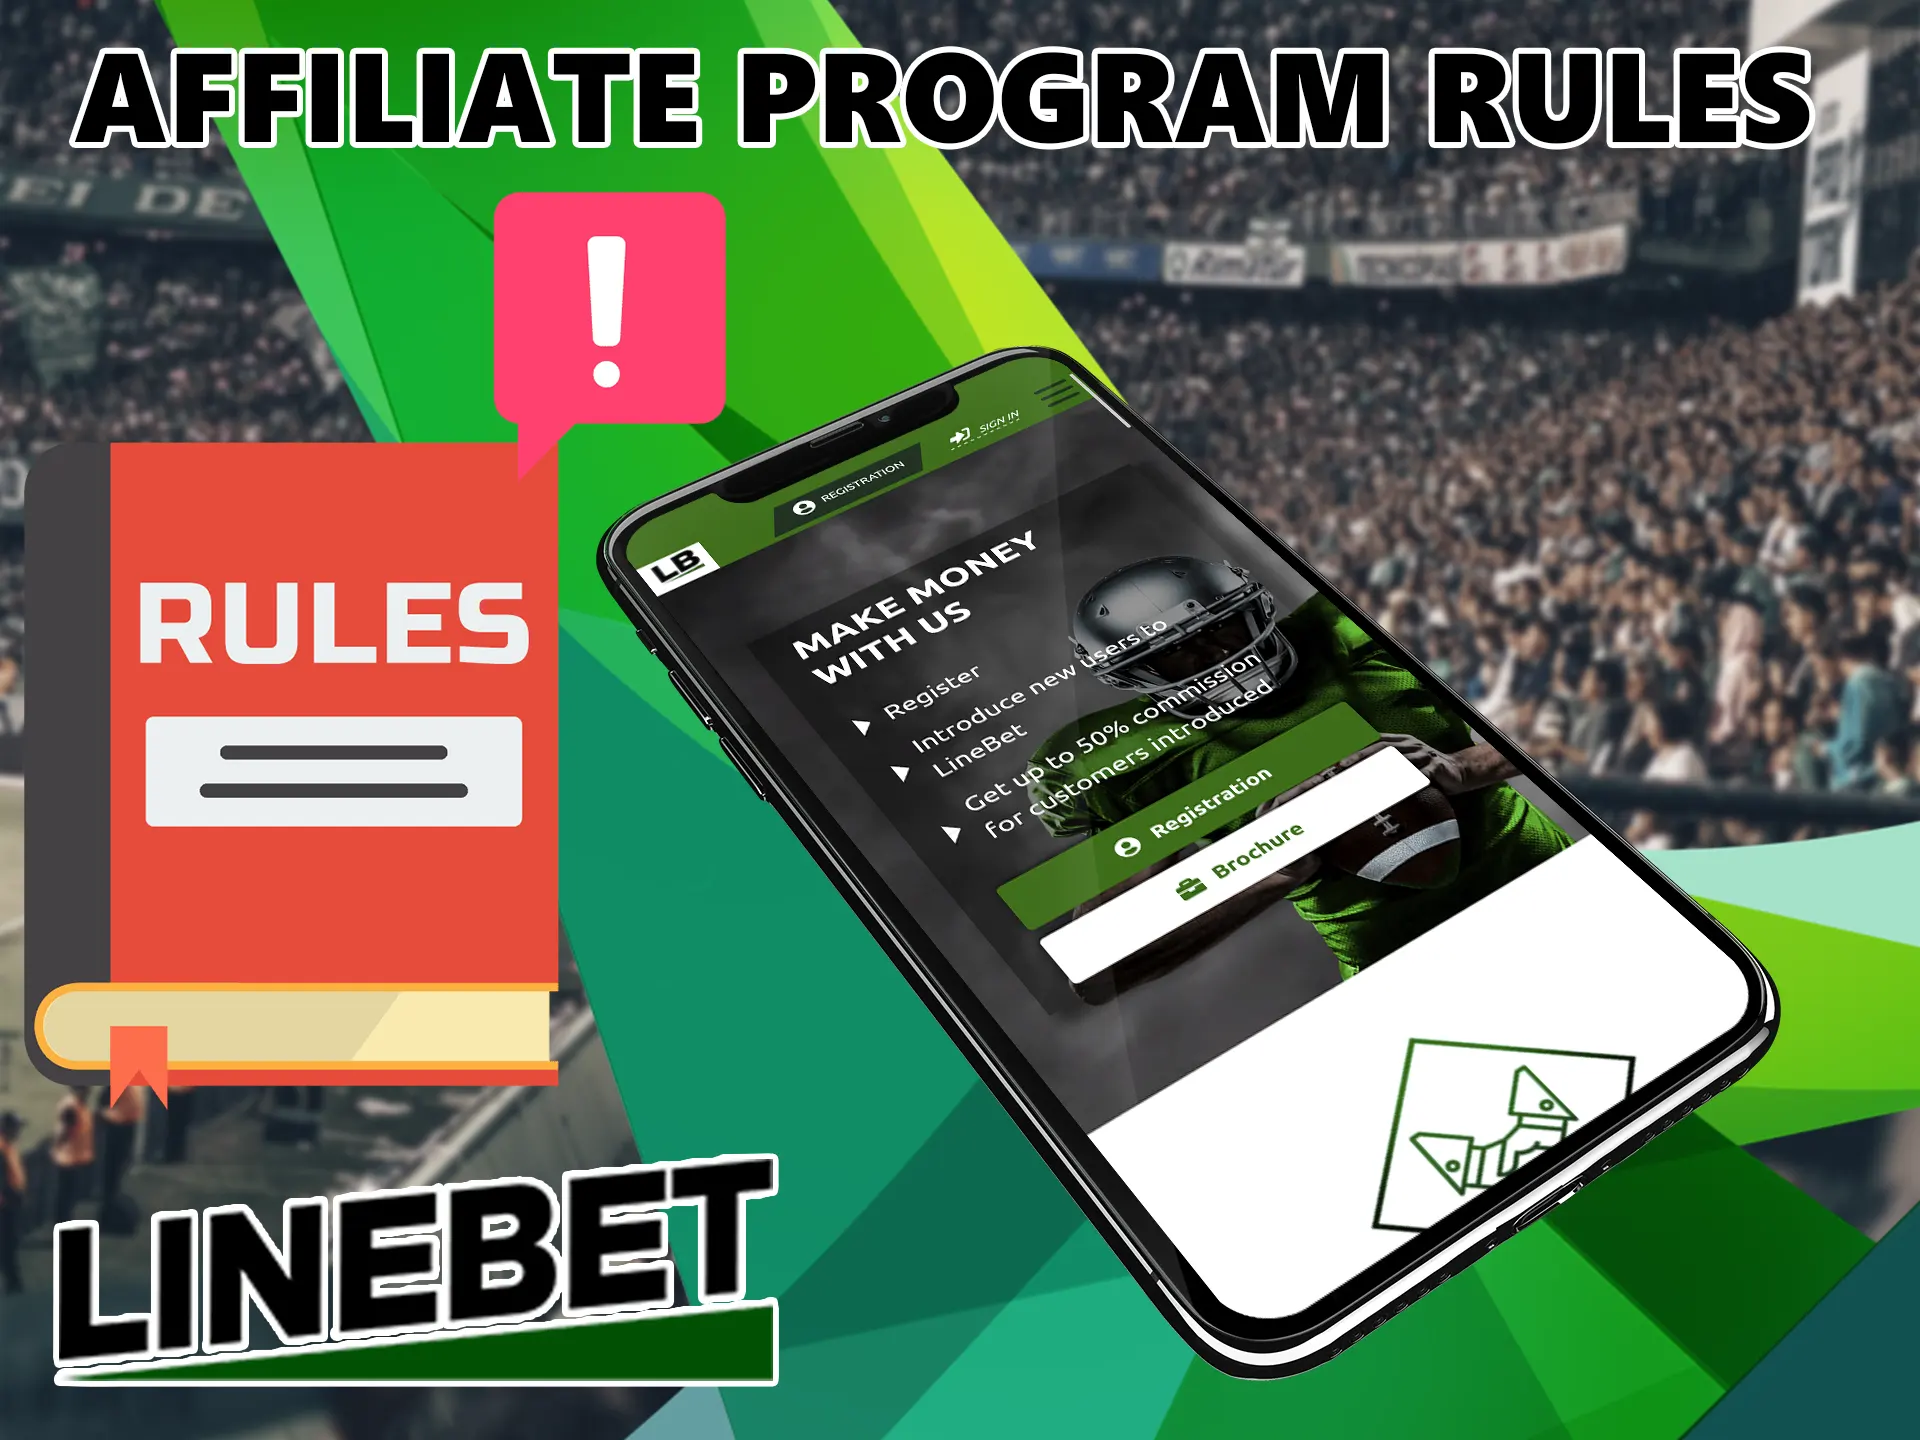 In order to avoid misunderstandings between the parties, a set of rules has been developed that partners must follow when using affiliate Linebet.